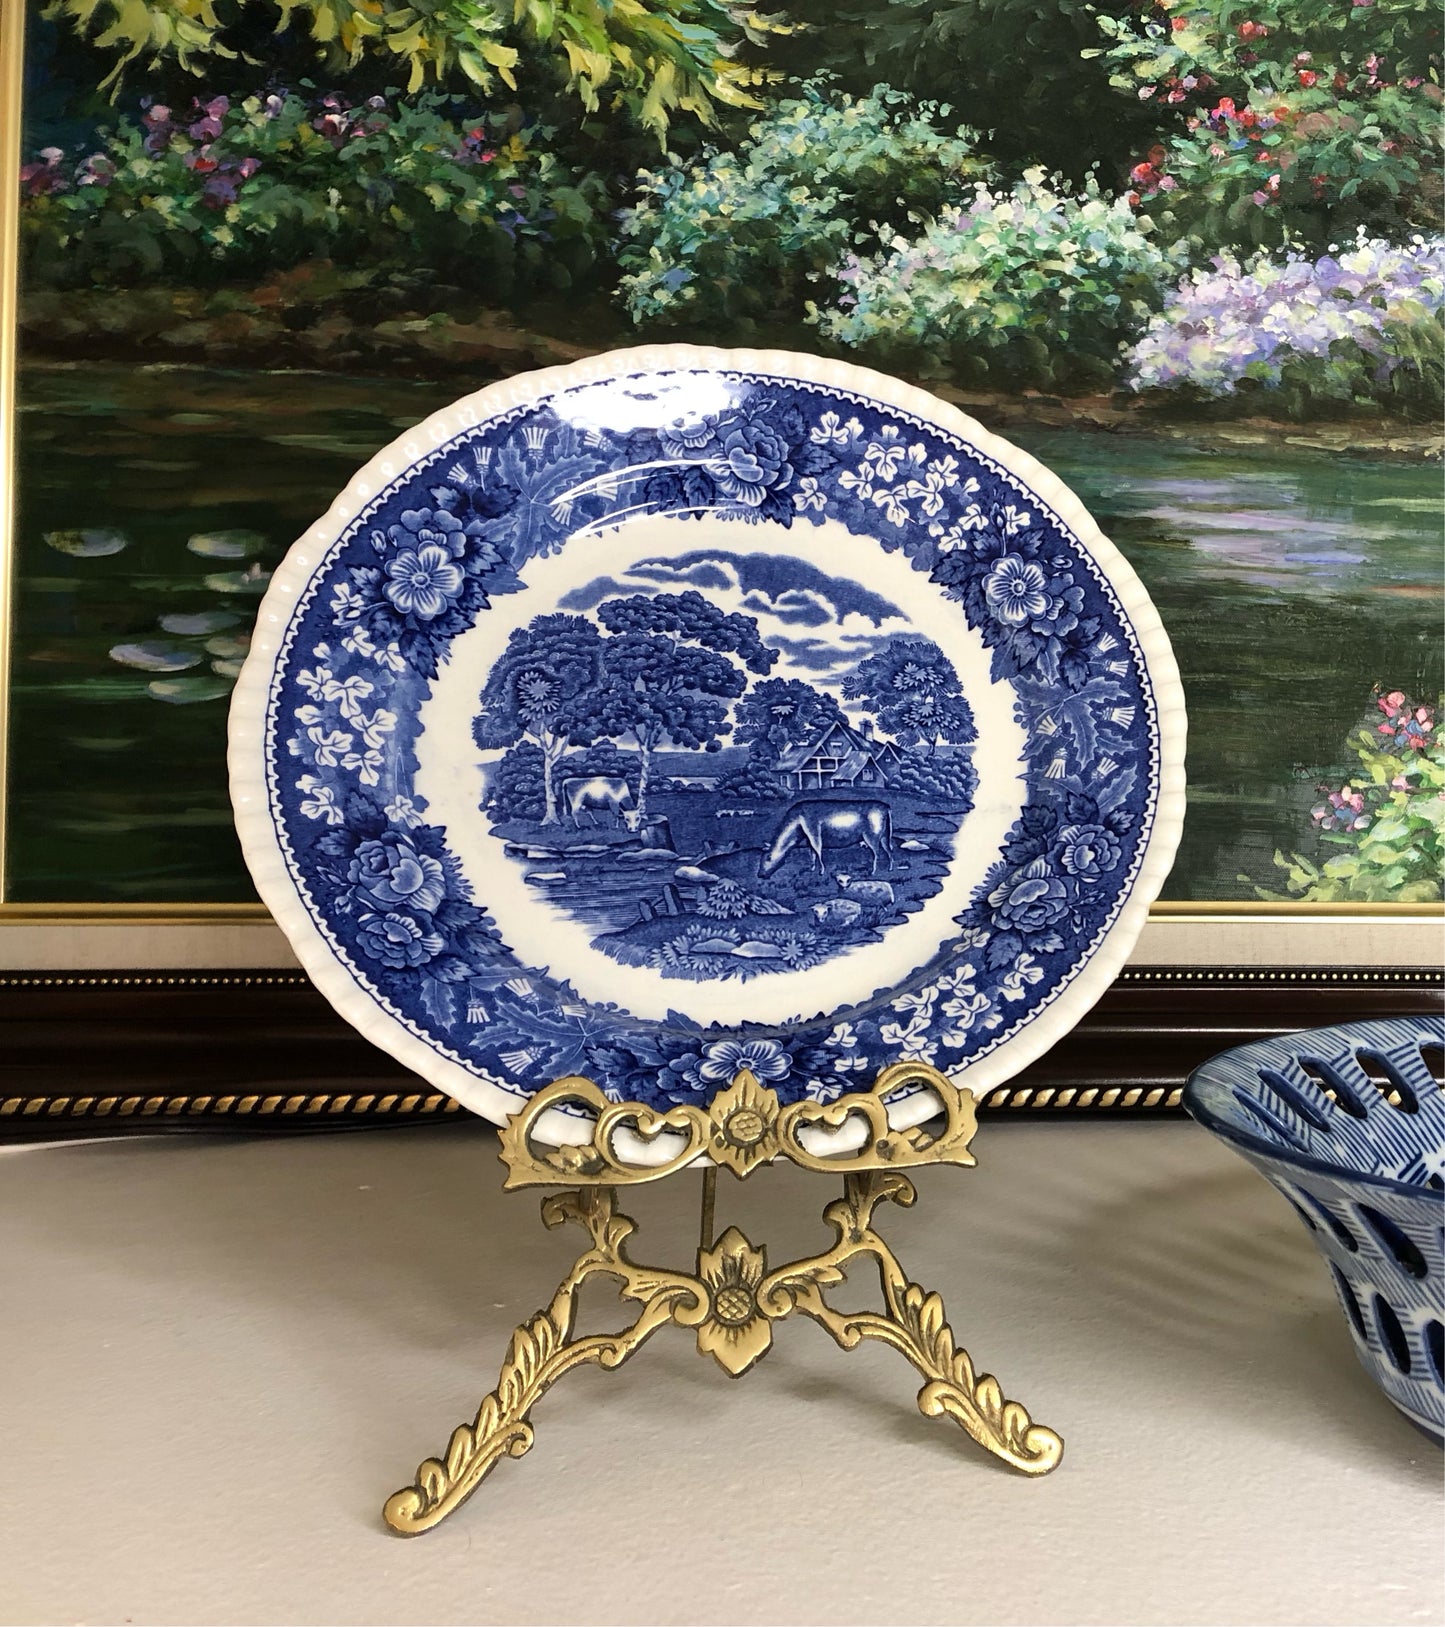 Vintage blue and white Adams English Scenic Pasture Scene plate - Excellent condition!